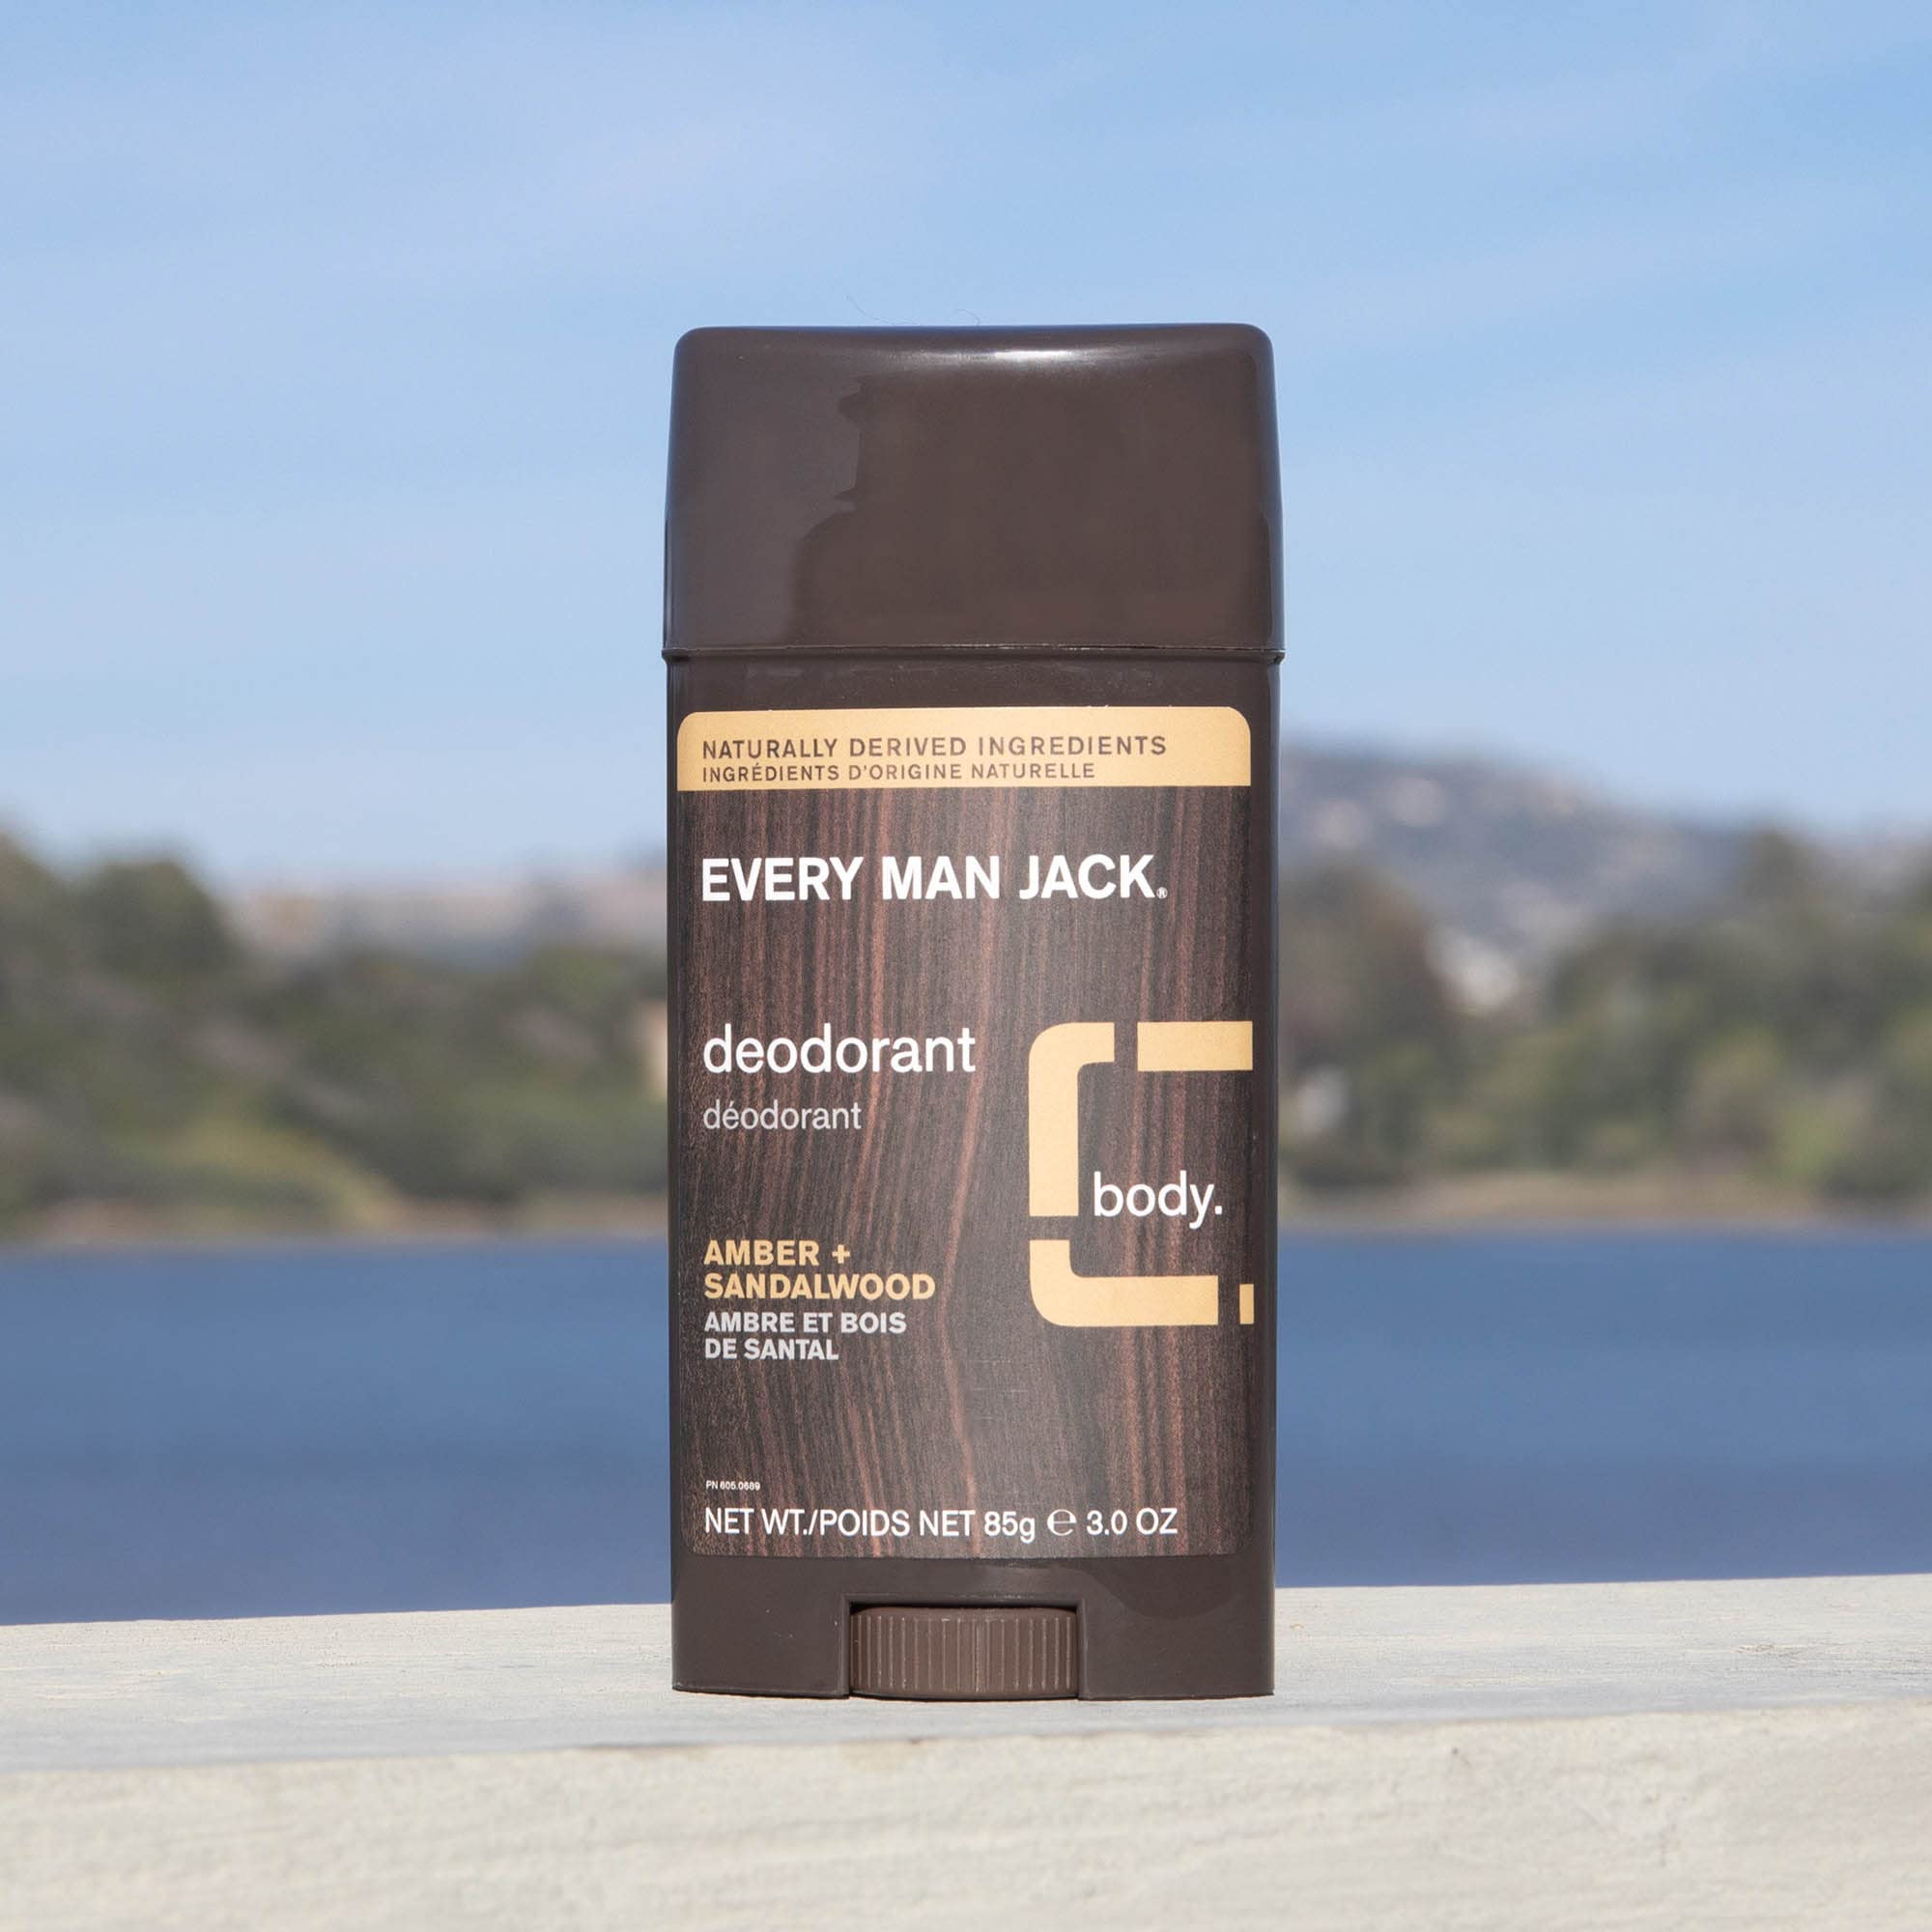 Every Man Jack Men’s Body Wash + Deodorant Set - Cleanse All Skin Types and Fight Odors with Naturally Derived Ingredients and Amber + Sandalwood Scent - Liter Body Wash Twin Pack + Deo Twin Pack